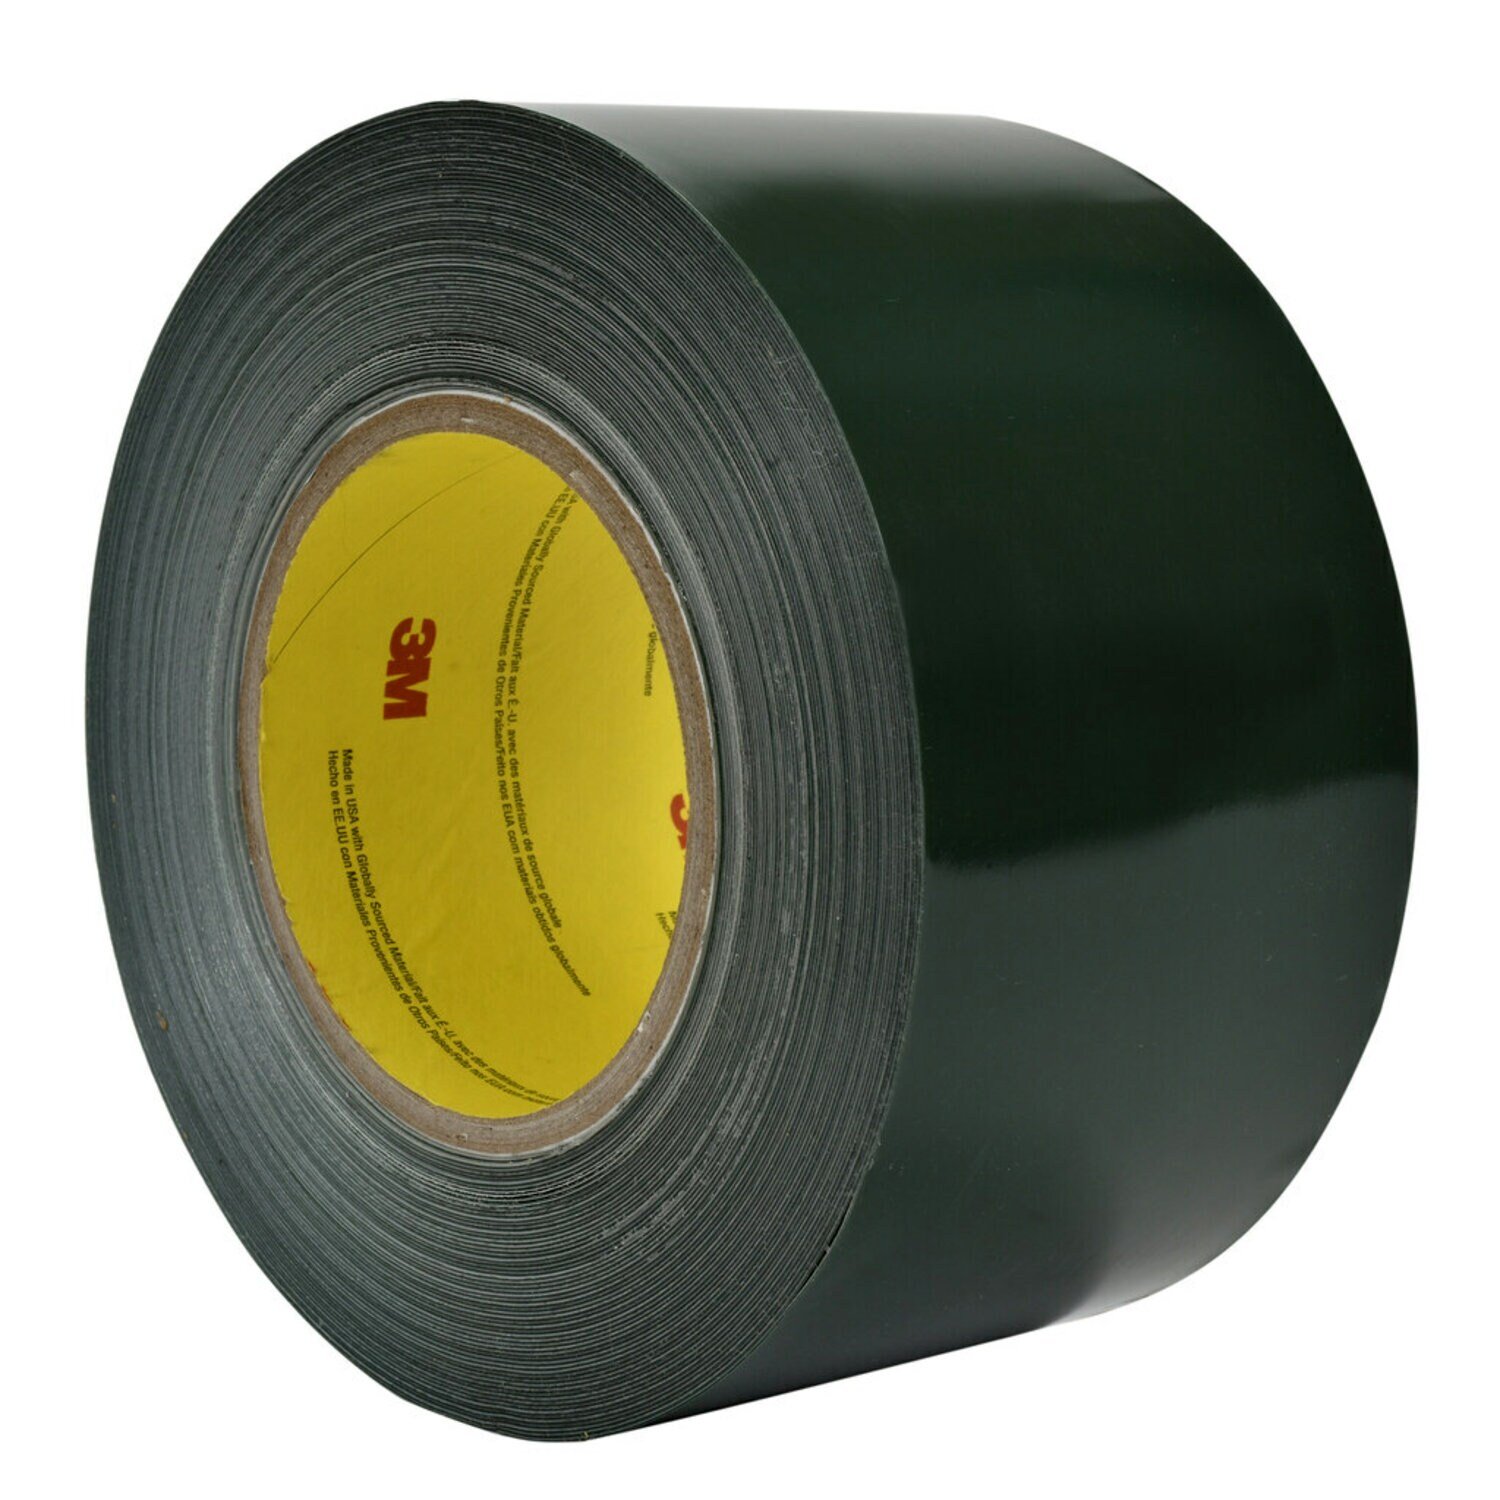 00076308987510 | 3M Sealing and Holding Tape 8069, 1 in x 25 yd